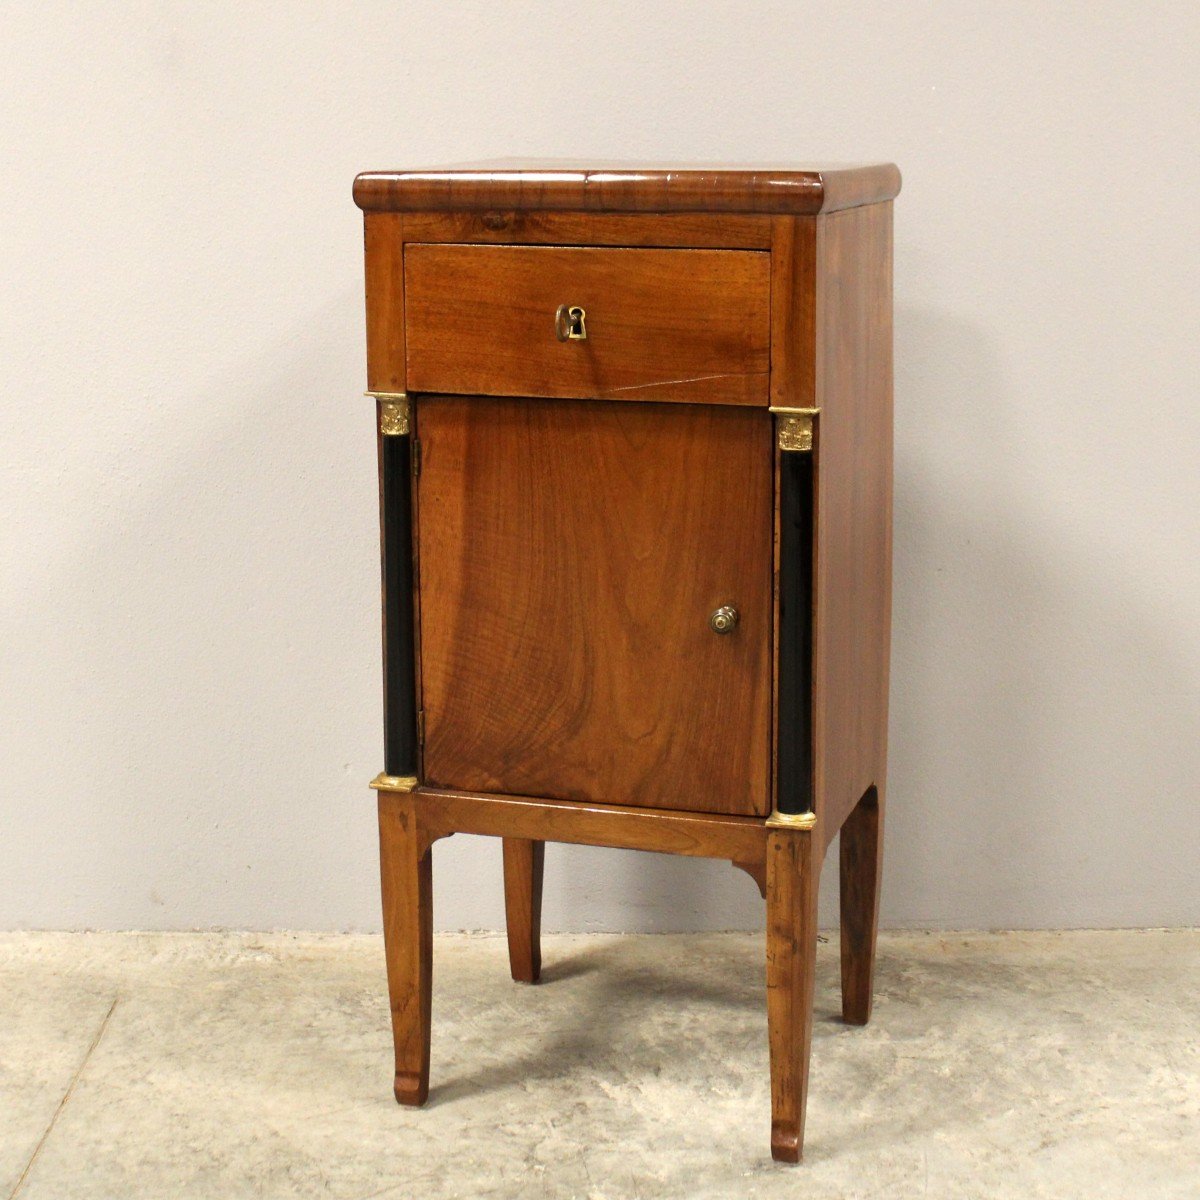 Antique Directoire Bedside Nightstand Table In Walnut - Italy 18th